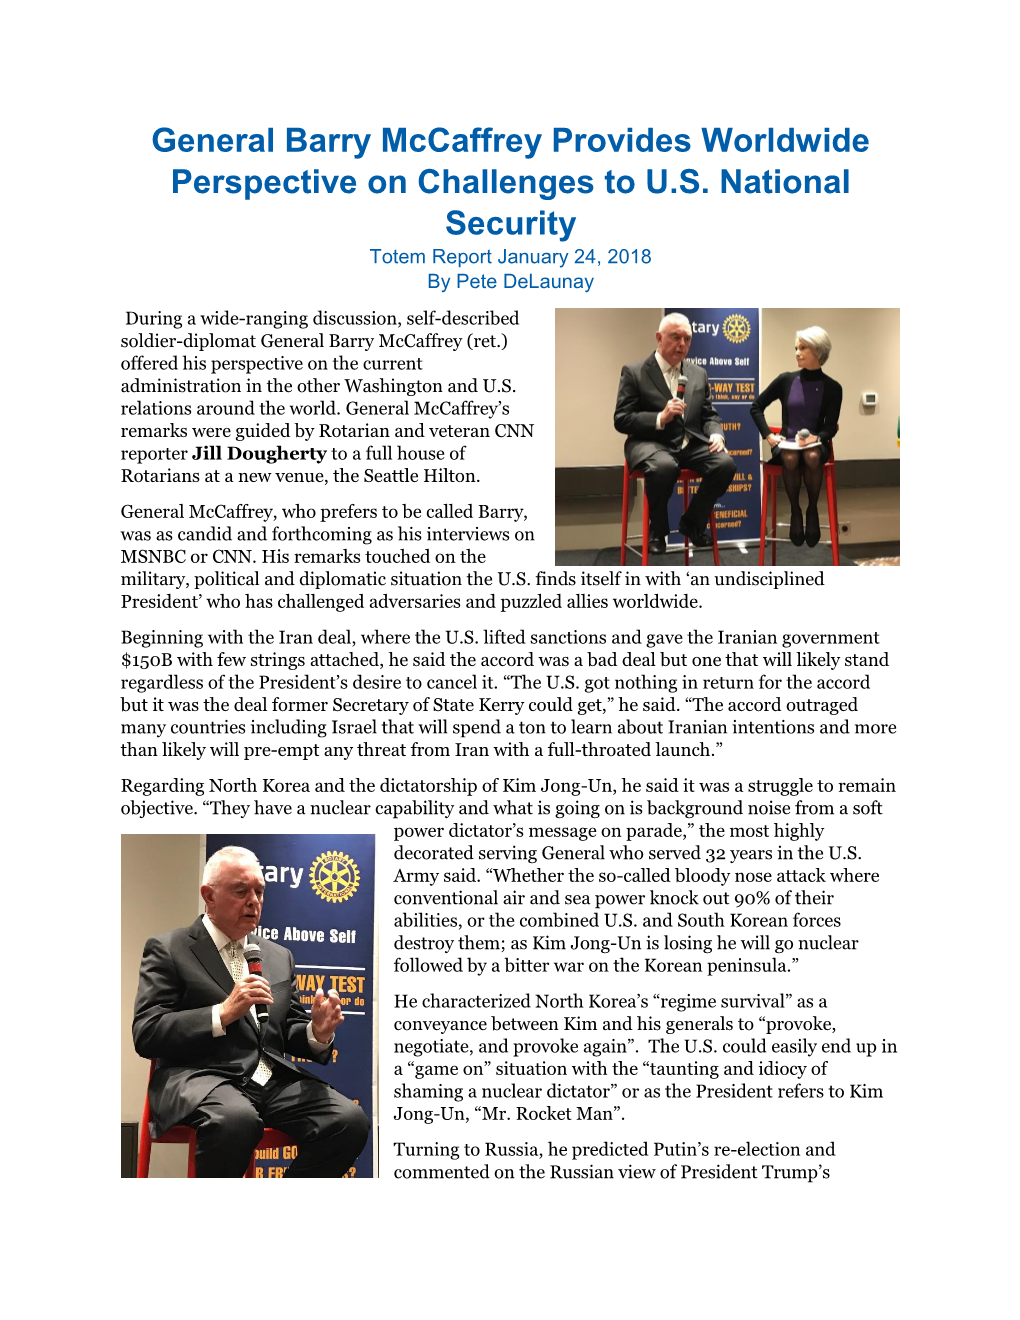 General Barry Mccaffrey Provides Worldwide Perspective on Challenges to U.S